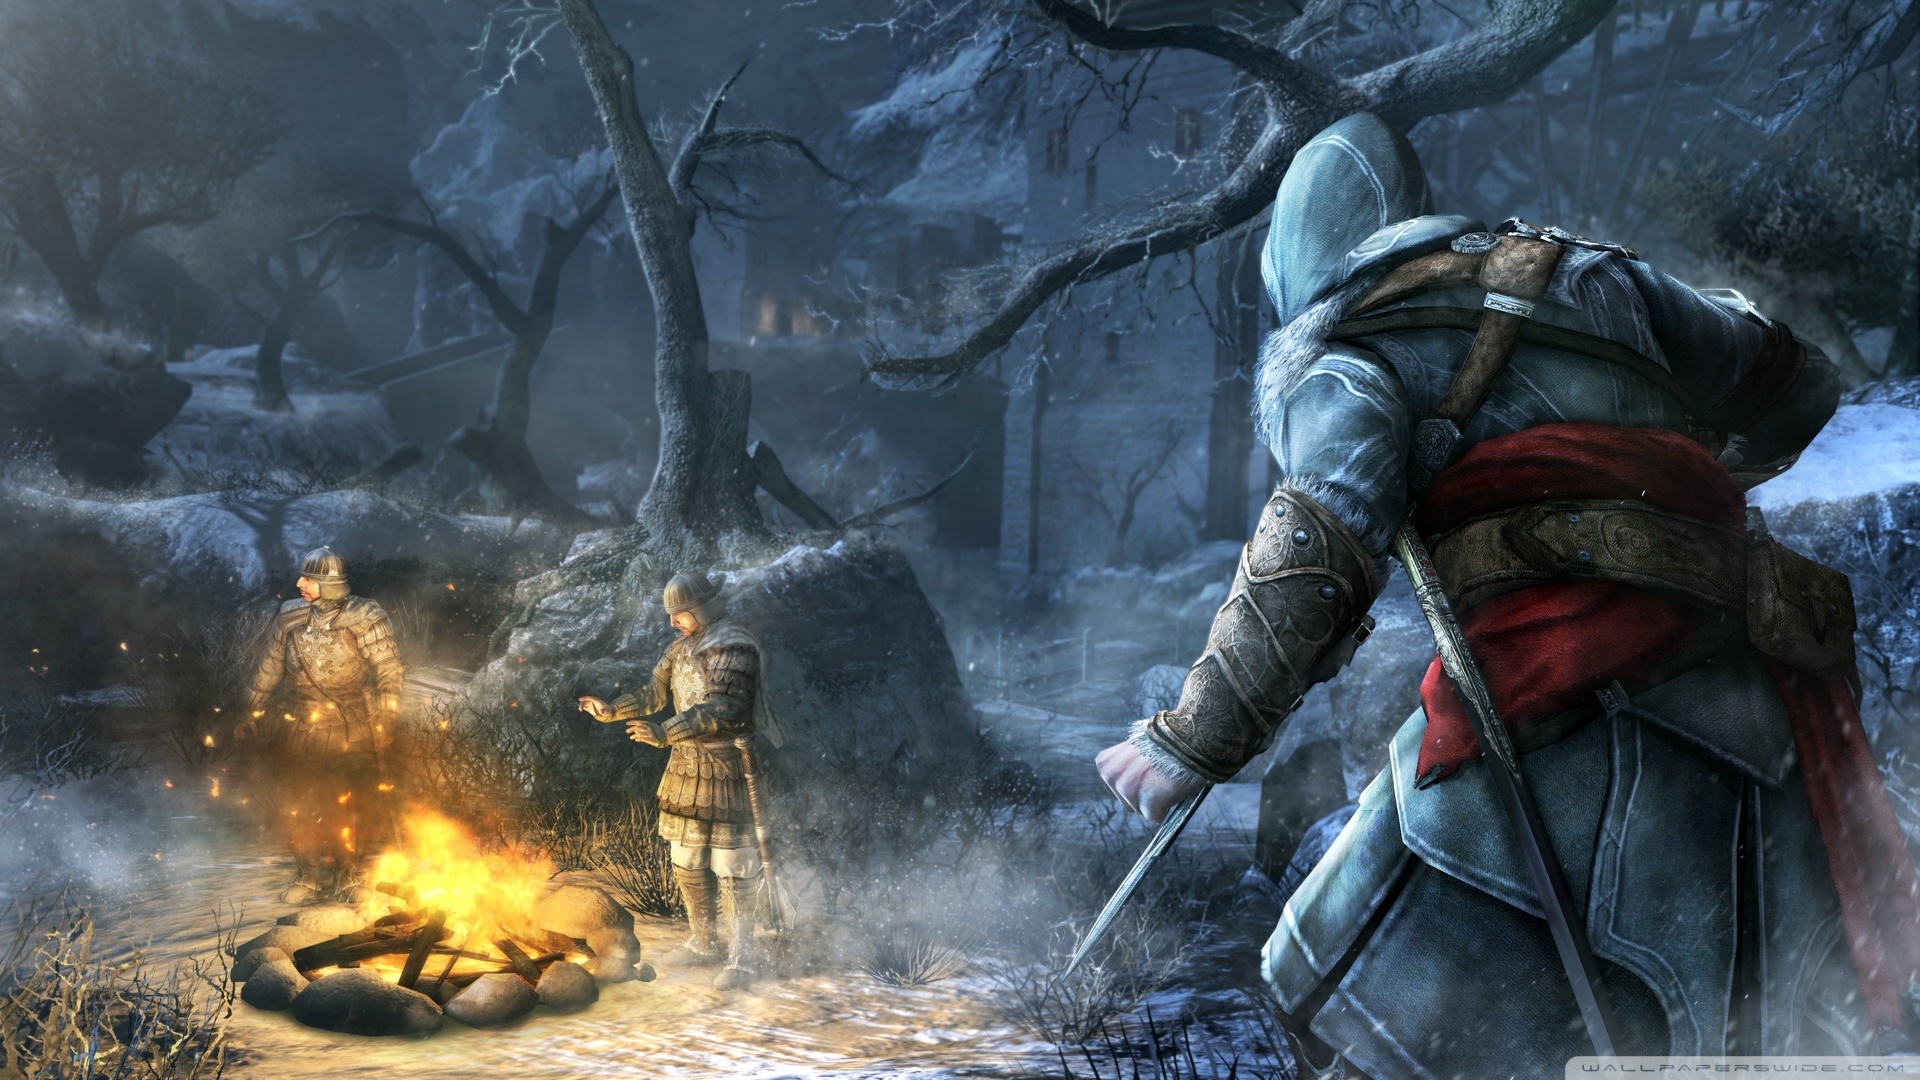 assassin's creed revelations wallpaper,action adventure game,pc game,strategy video game,games,adventure game